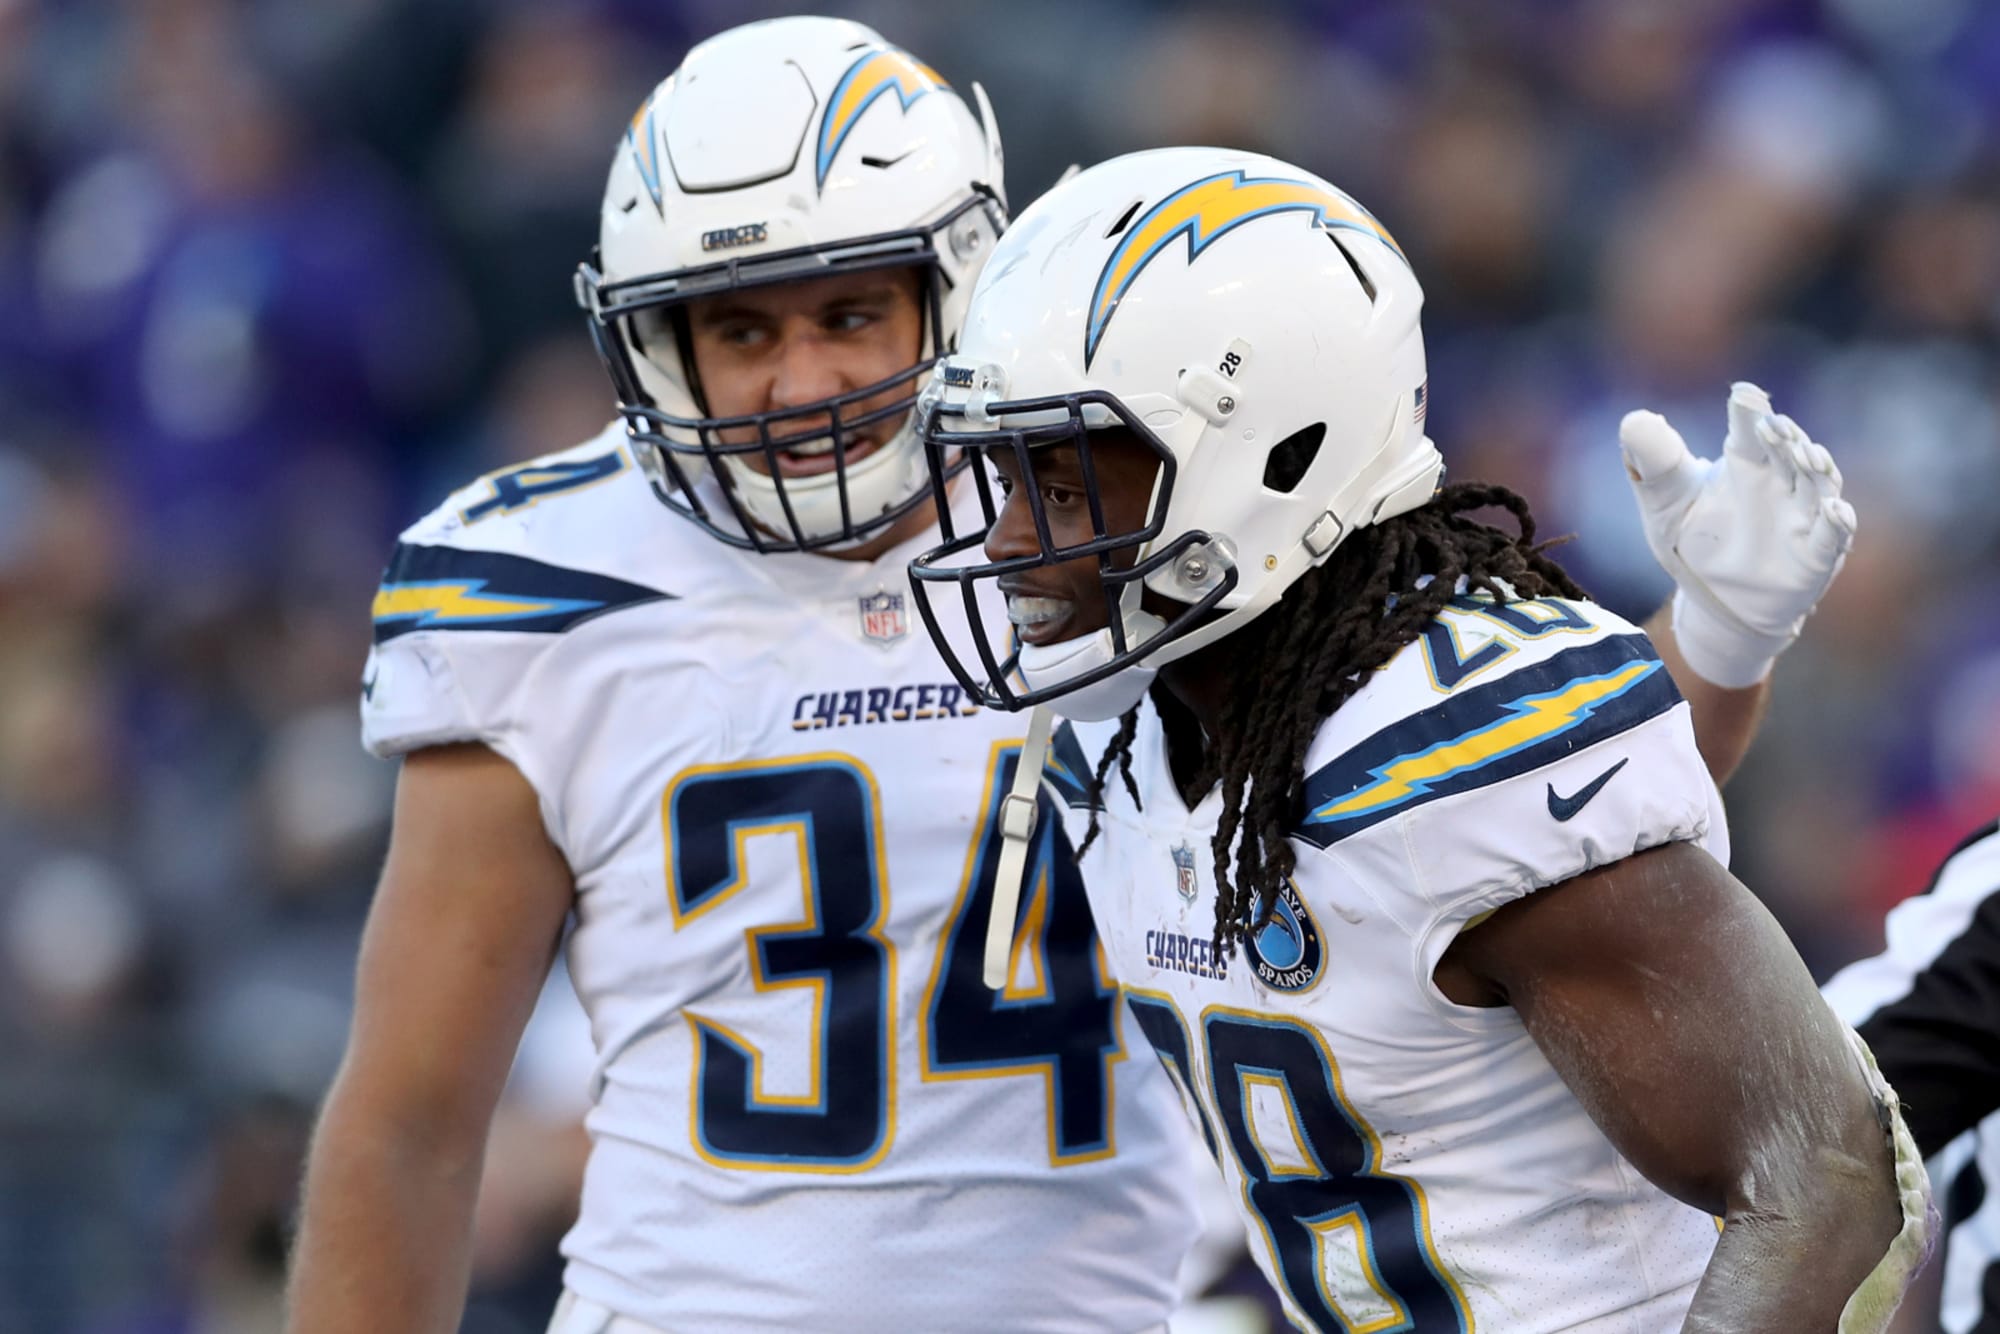 Melvin Gordon will skip LA Chargers camp and demand trade if he